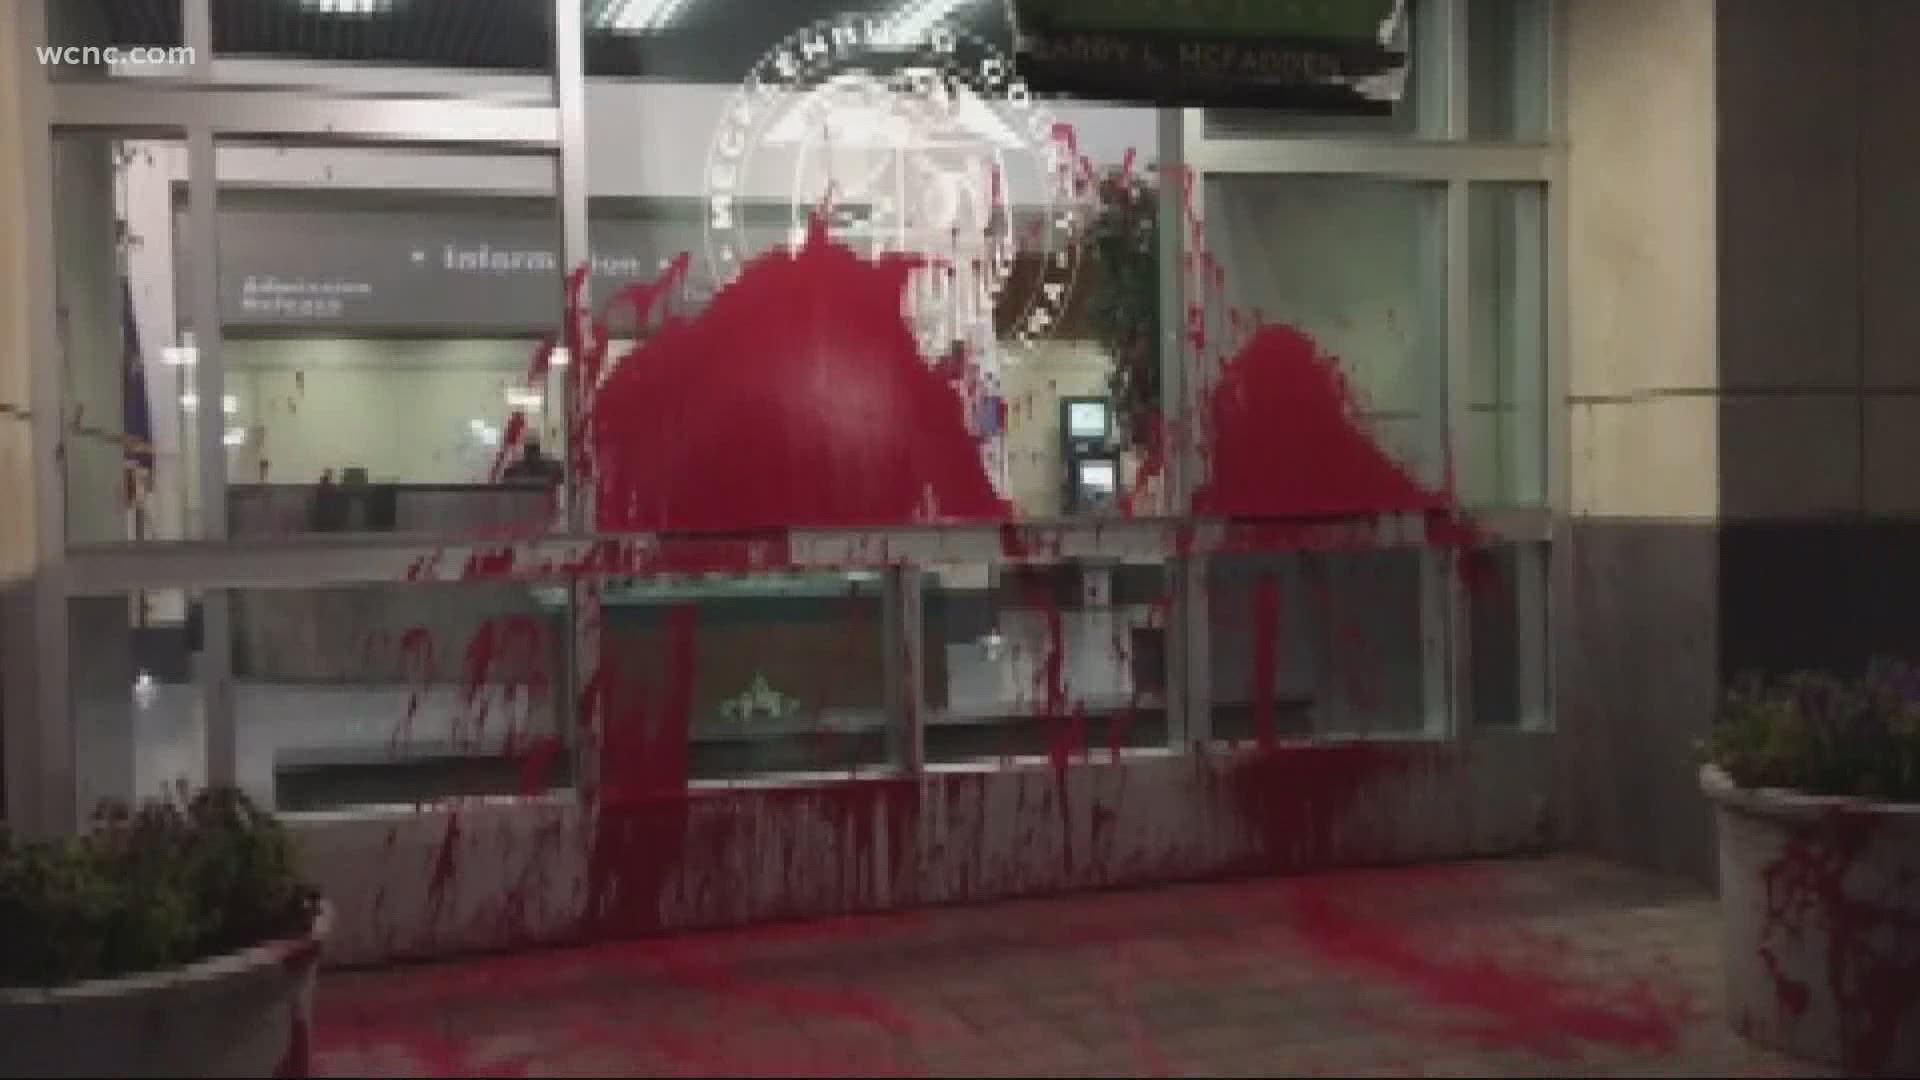 Protesters vandalized the jail on Sunday night by throwing red paint on the entrance doors.